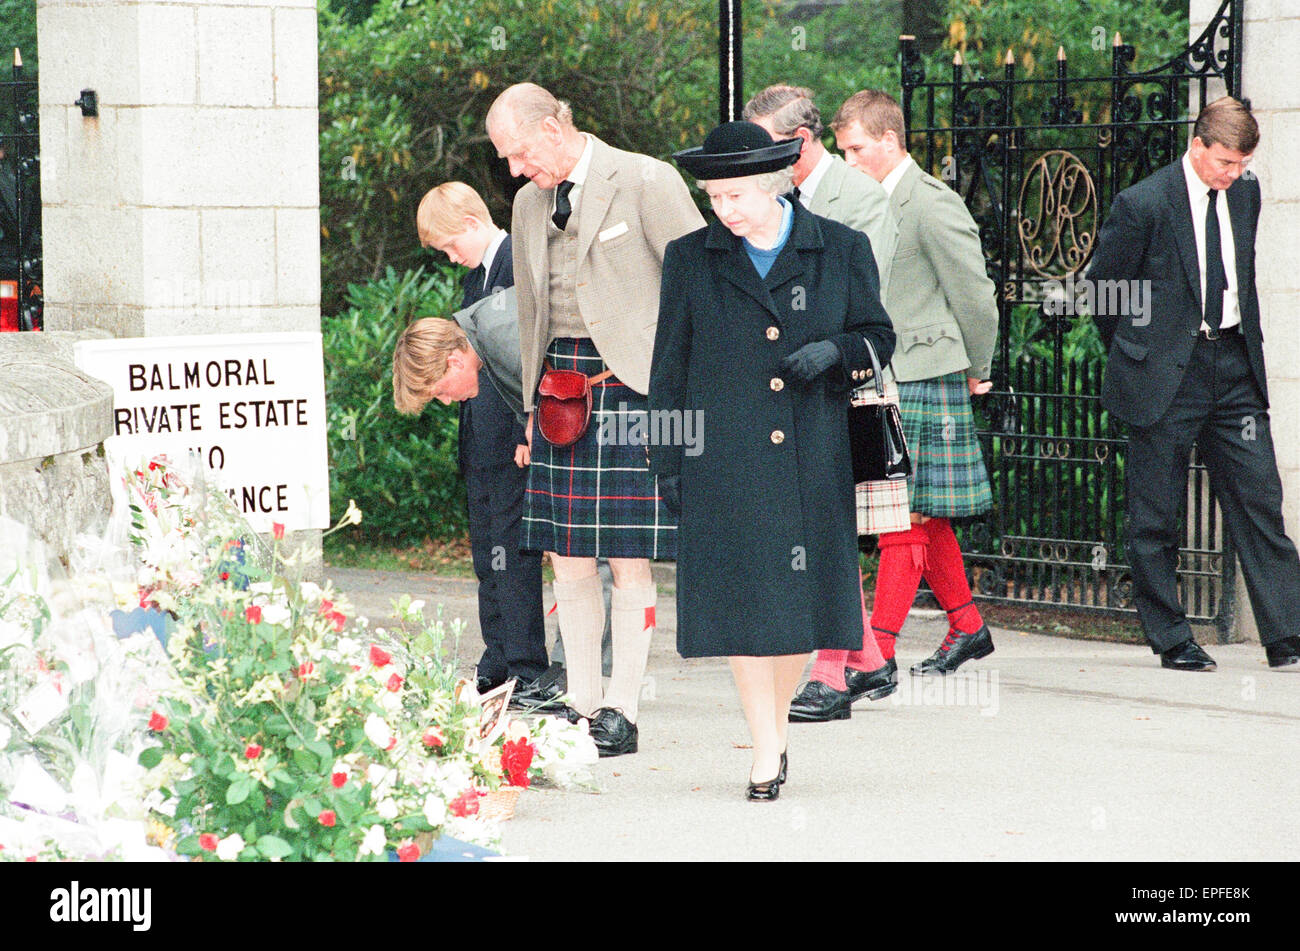 Royal Family, Balmoral Estate, Scotland, 5th September 1997.   After attending a private service at Crathie Church, Royal family stop to look at floral tributes left for Princess Diana, at the gates of Balmoral Castle.  Queen Elizabeth II Prince Philip Pr Stock Photo